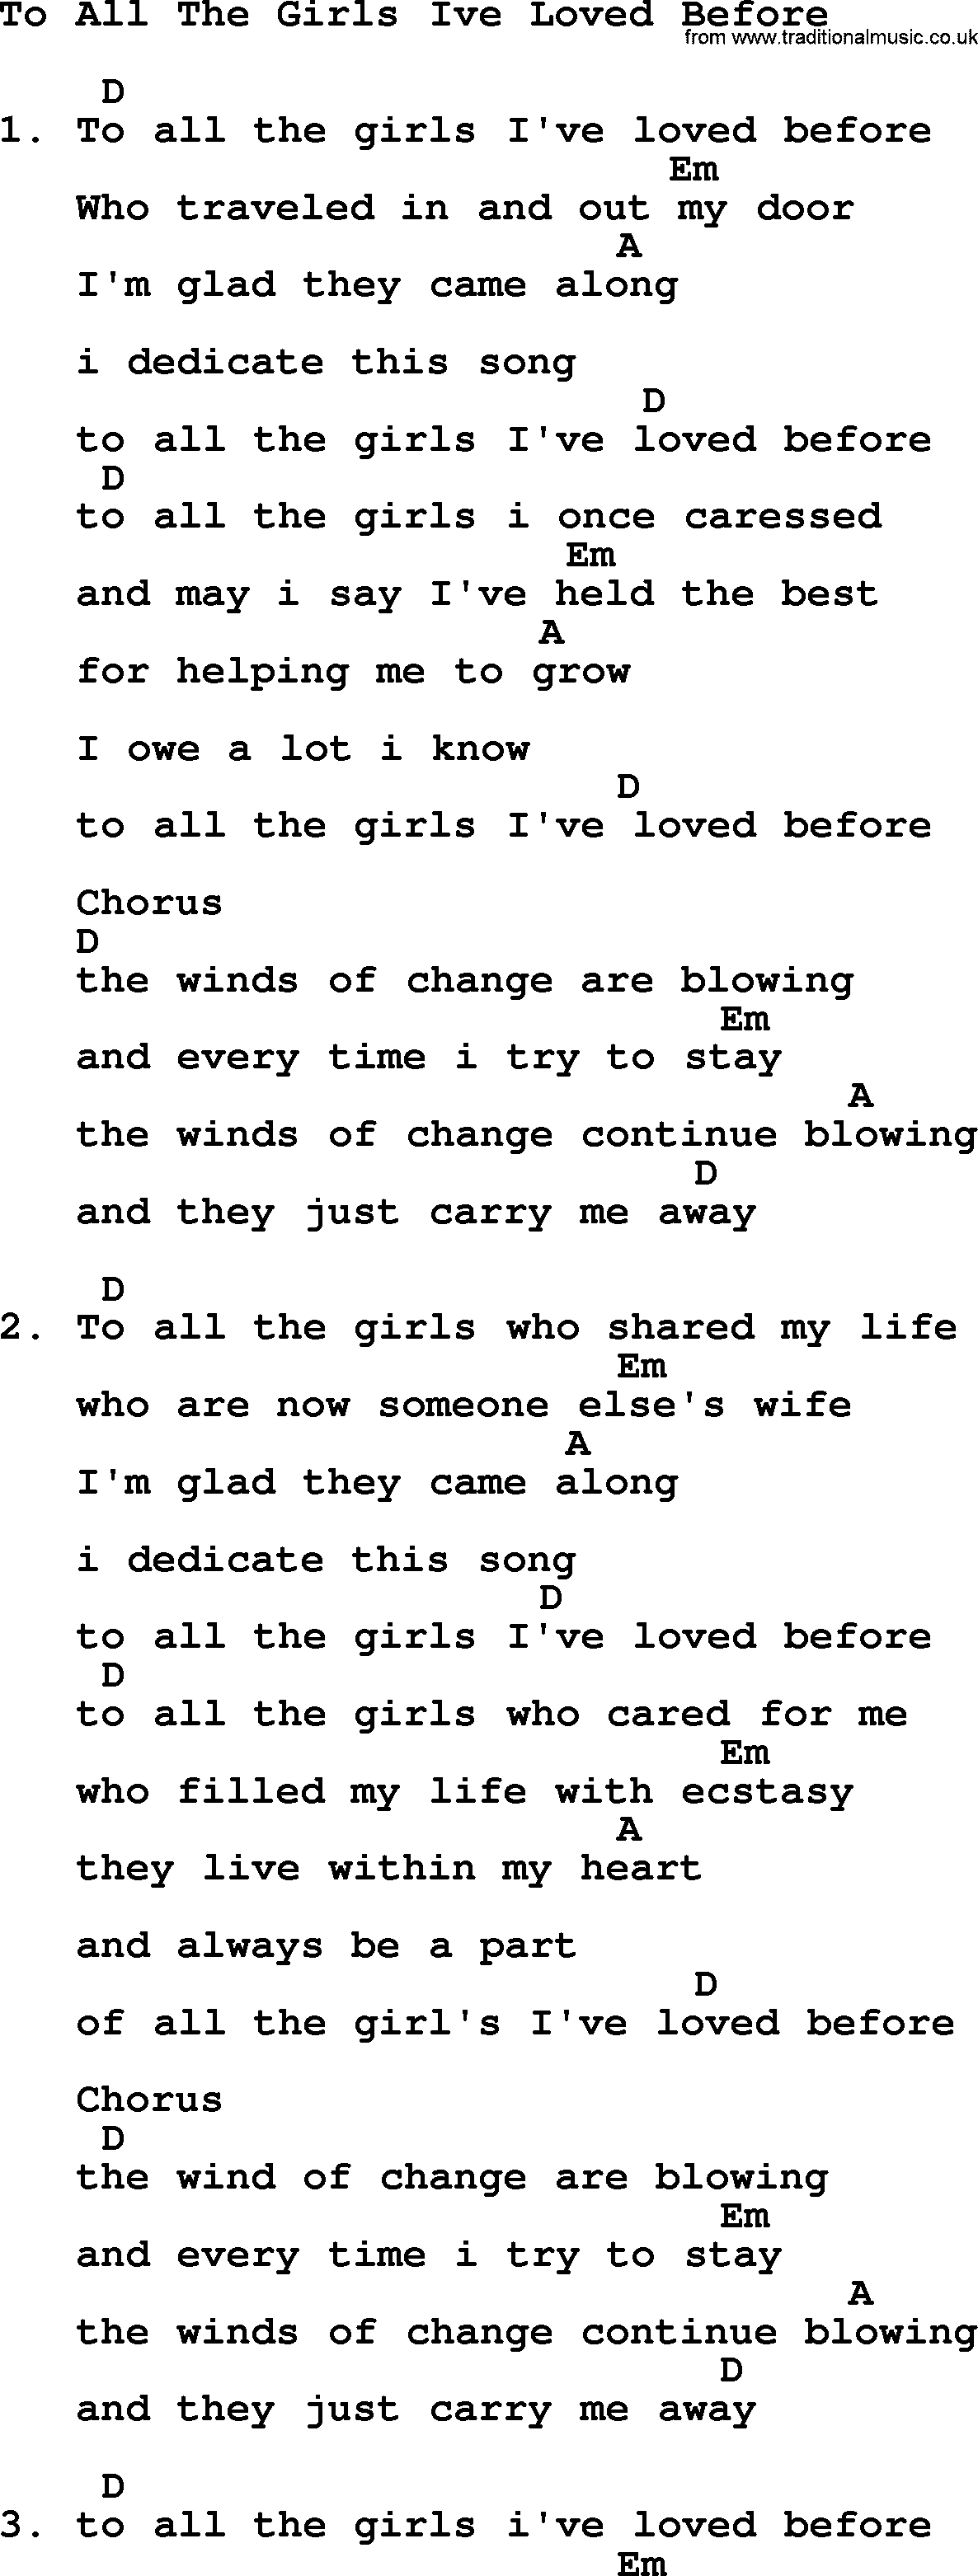 Willie Nelson song: To All The Girls Ive Loved Before, lyrics and chords